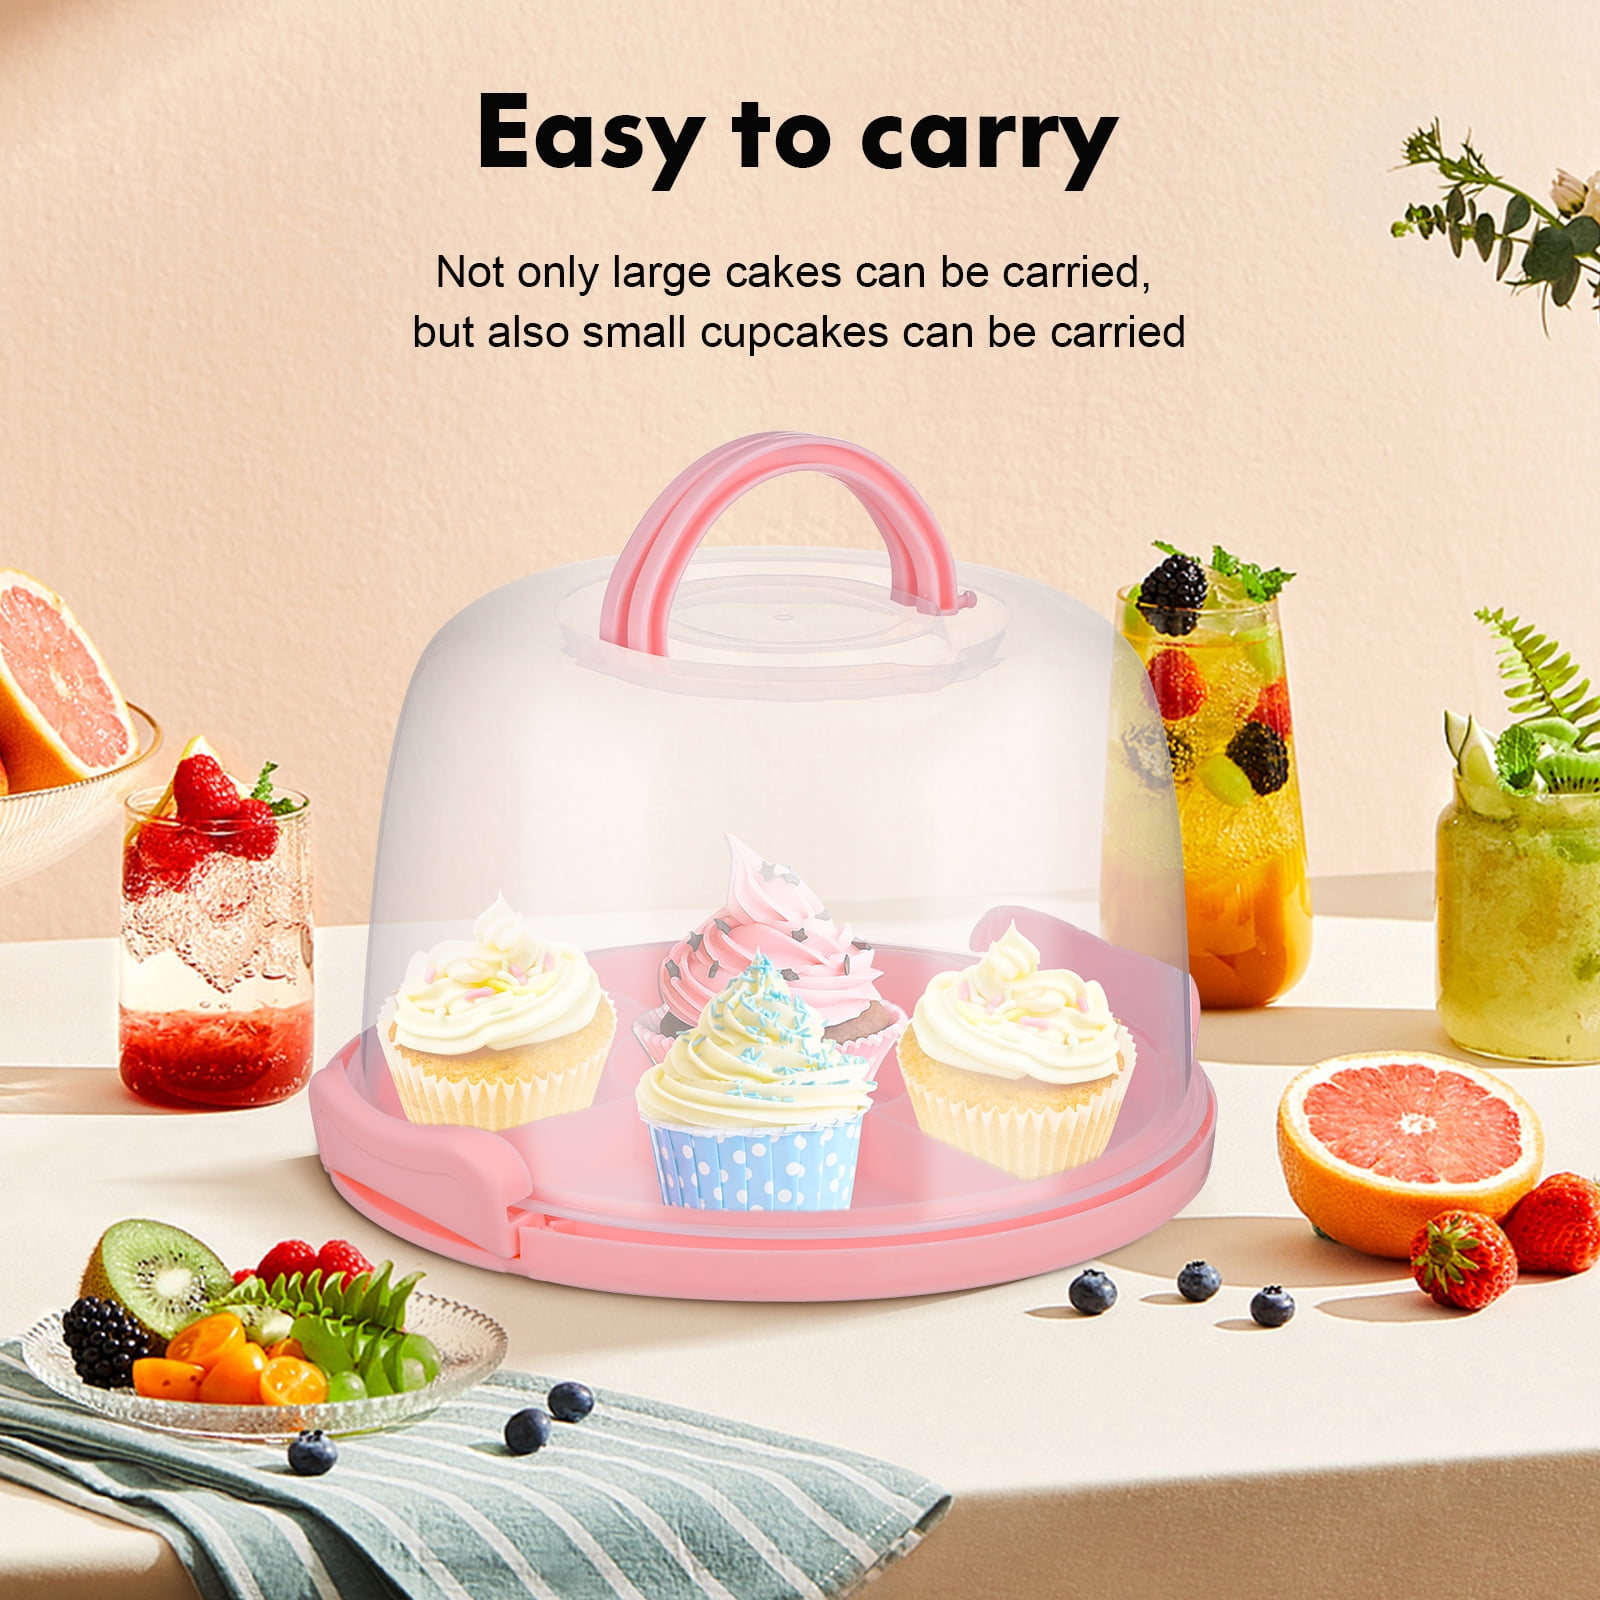 Bakers Sto N Go Cookie Carrier *Compact Size